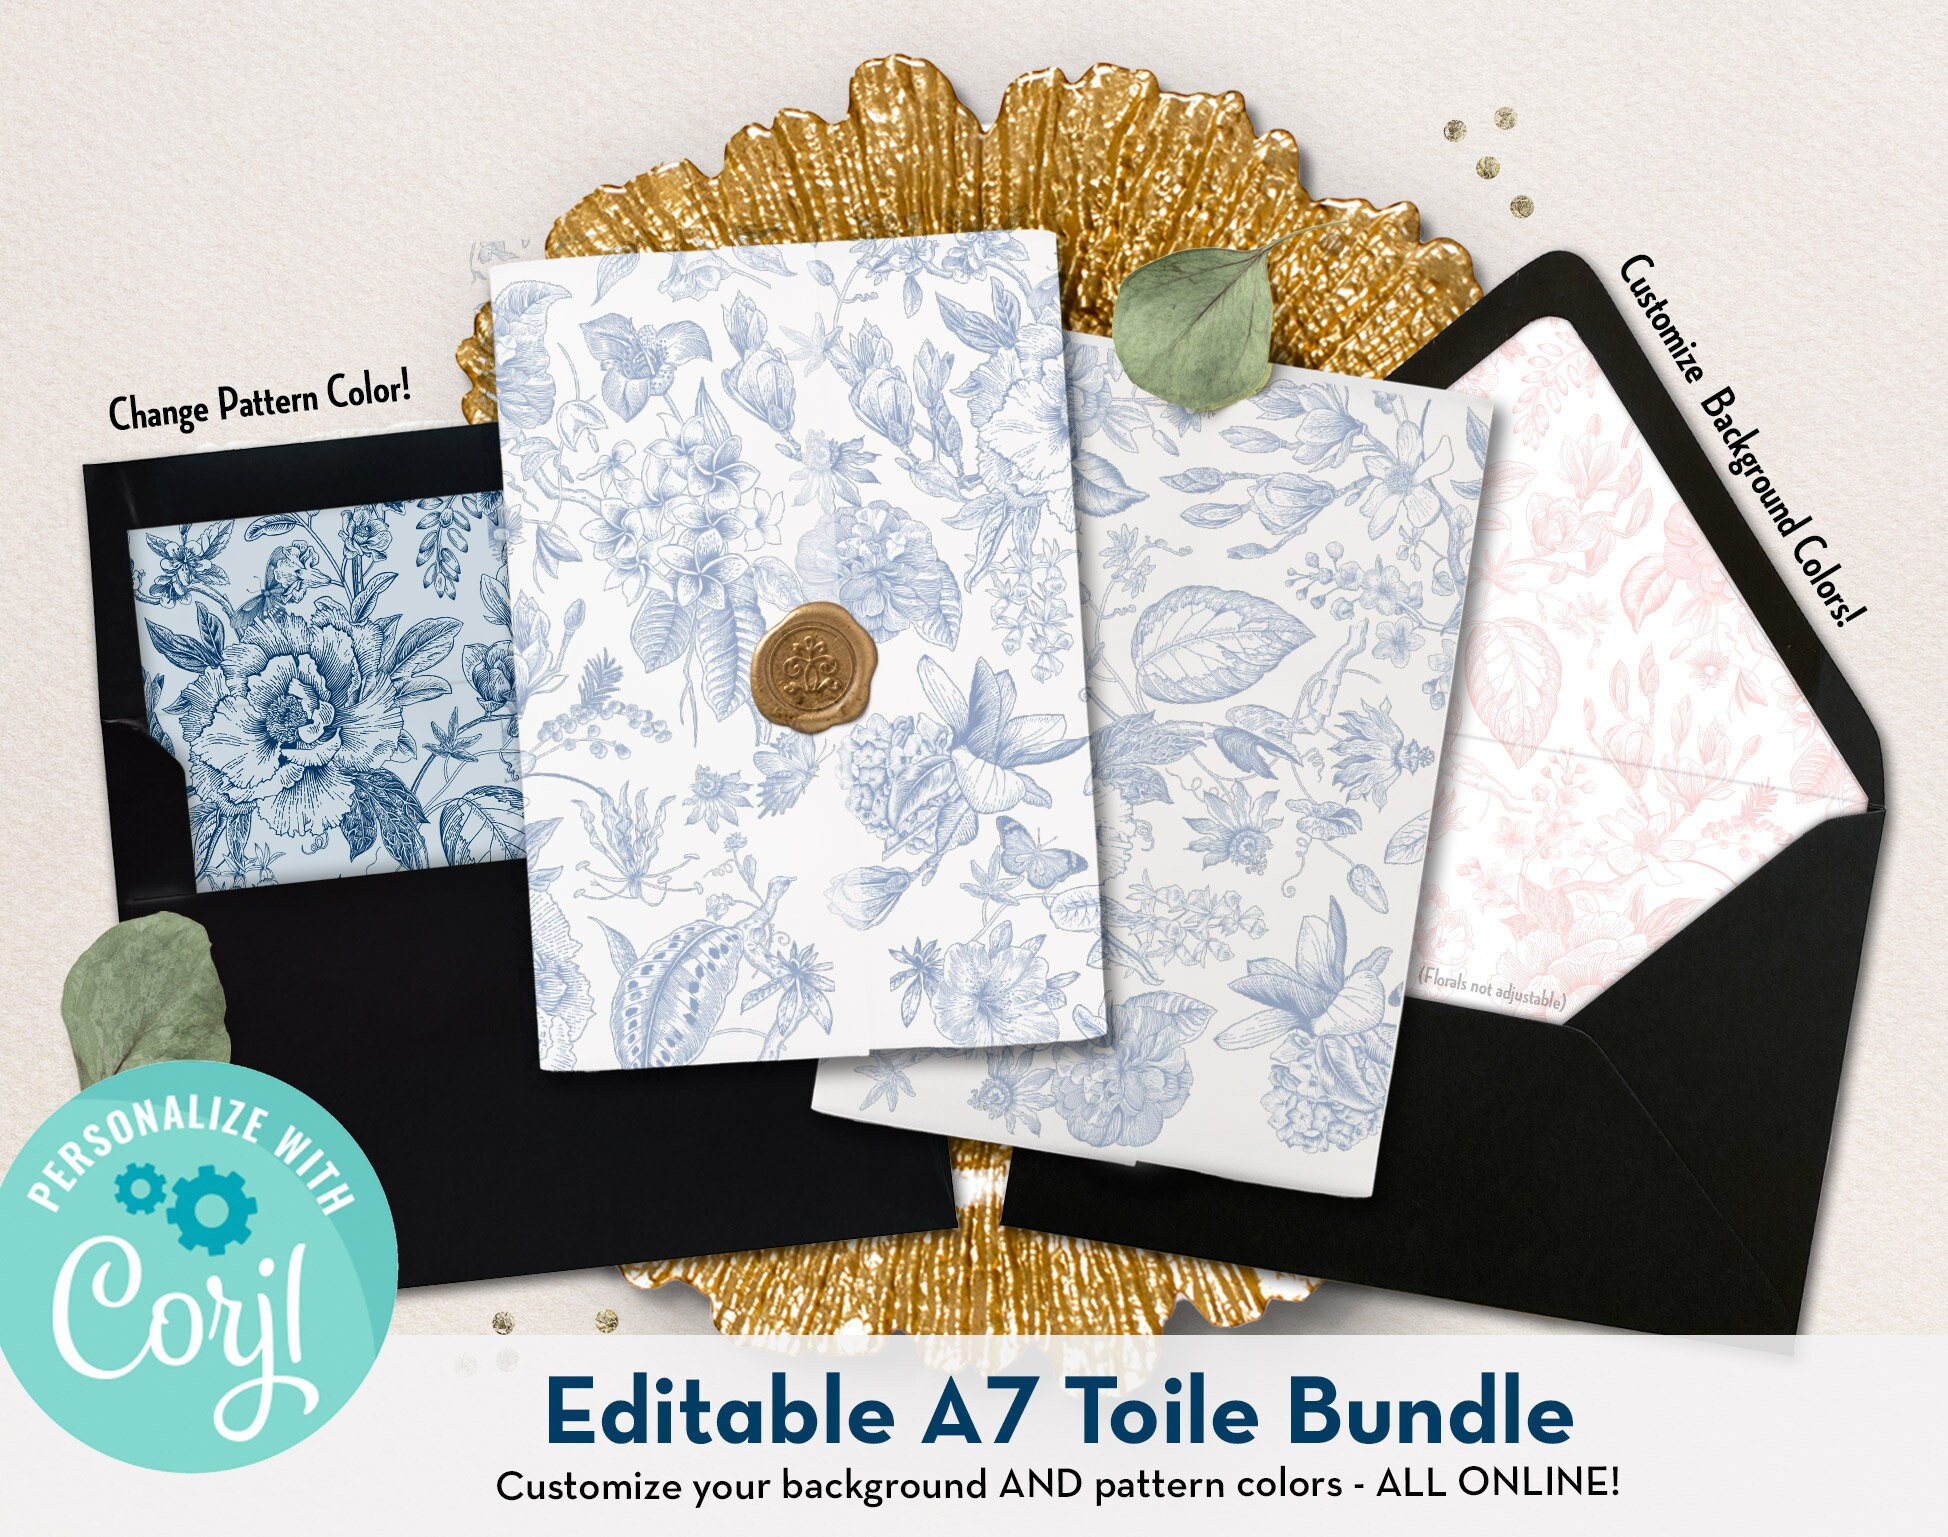 Printable Envelope Liner, A7, Euro Flap, Square Flap, 6.5 Square, A6, 5.75  Square, 4 Bar, 4 Bar for 5x7 Wedding Invitations, Toile Sage